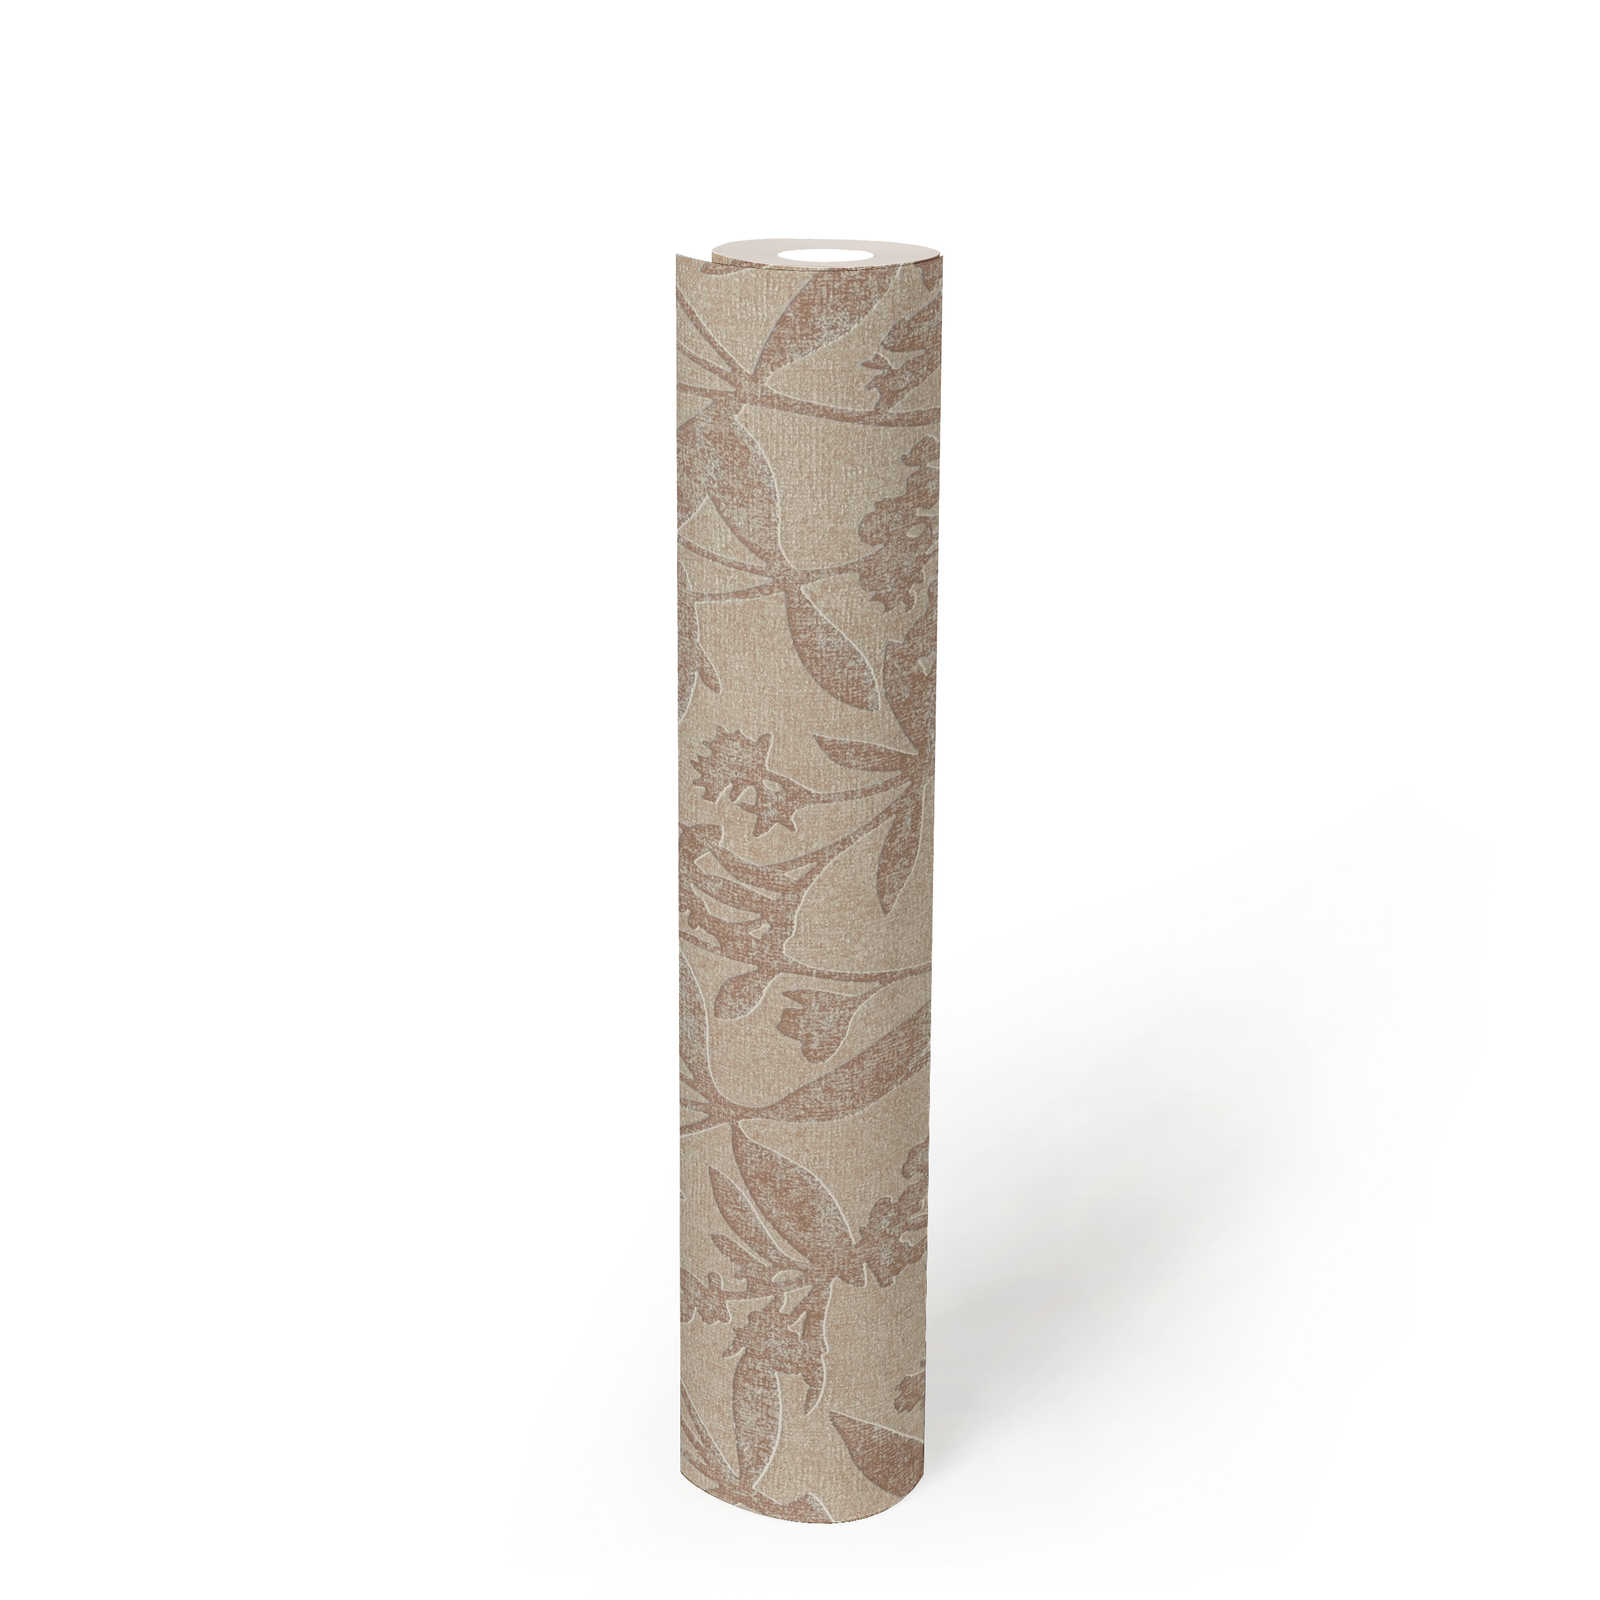             Floral non-woven wallpaper with flowers structure pattern - beige
        